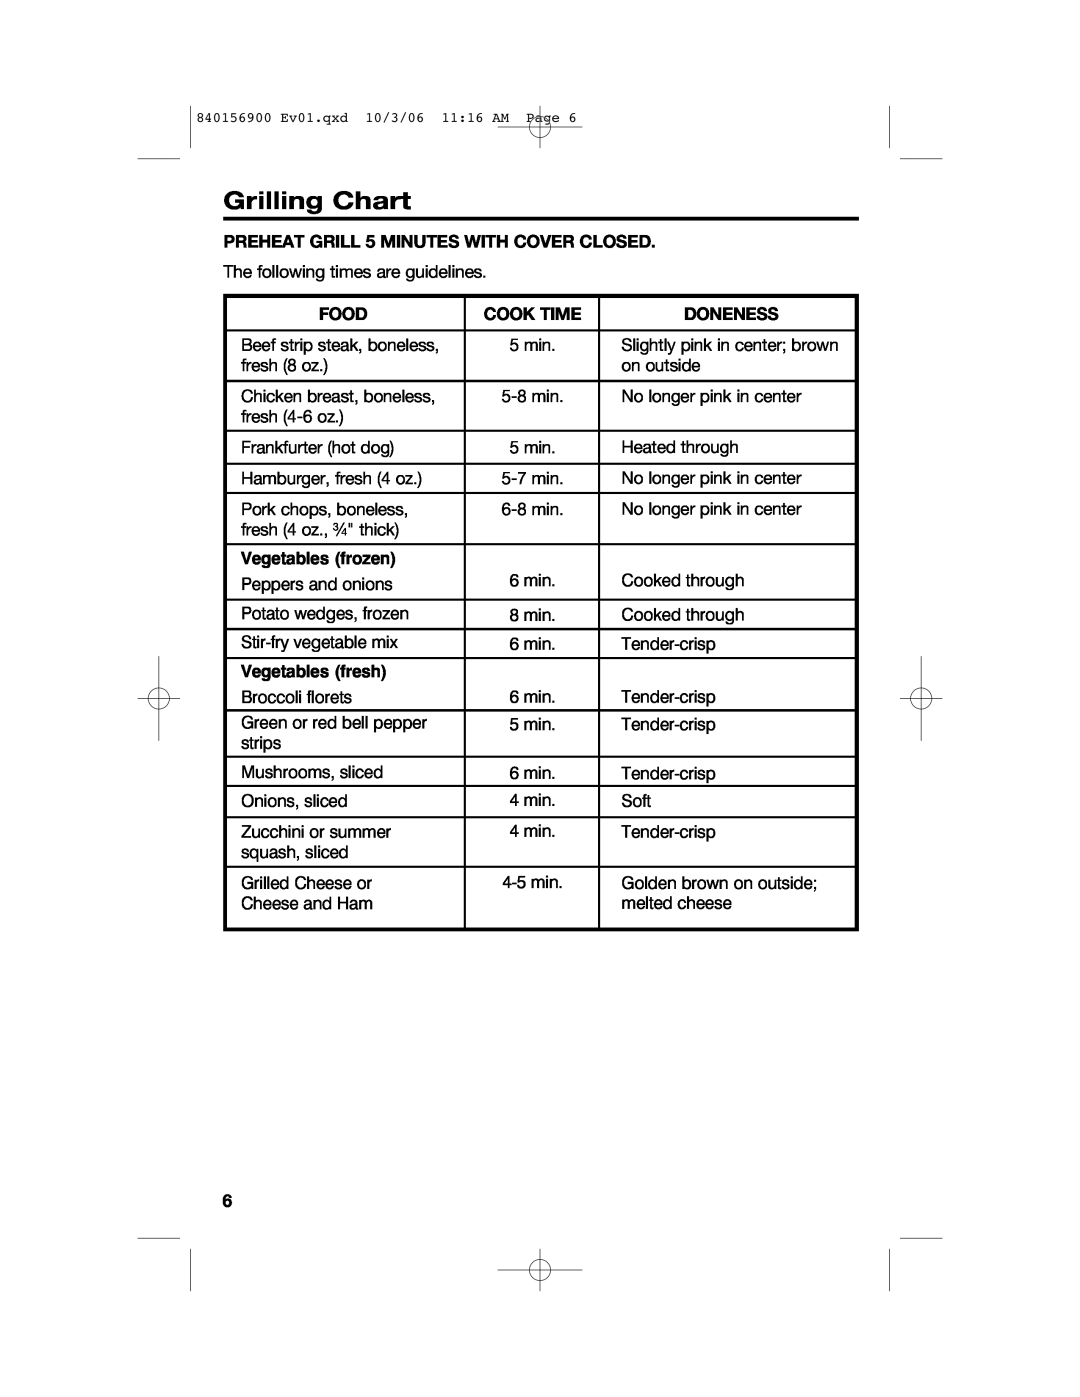 Hamilton Beach 25285 manual Grilling Chart, PREHEAT GRILL 5 MINUTES WITH COVER CLOSED, Food, Cook Time, Doneness 